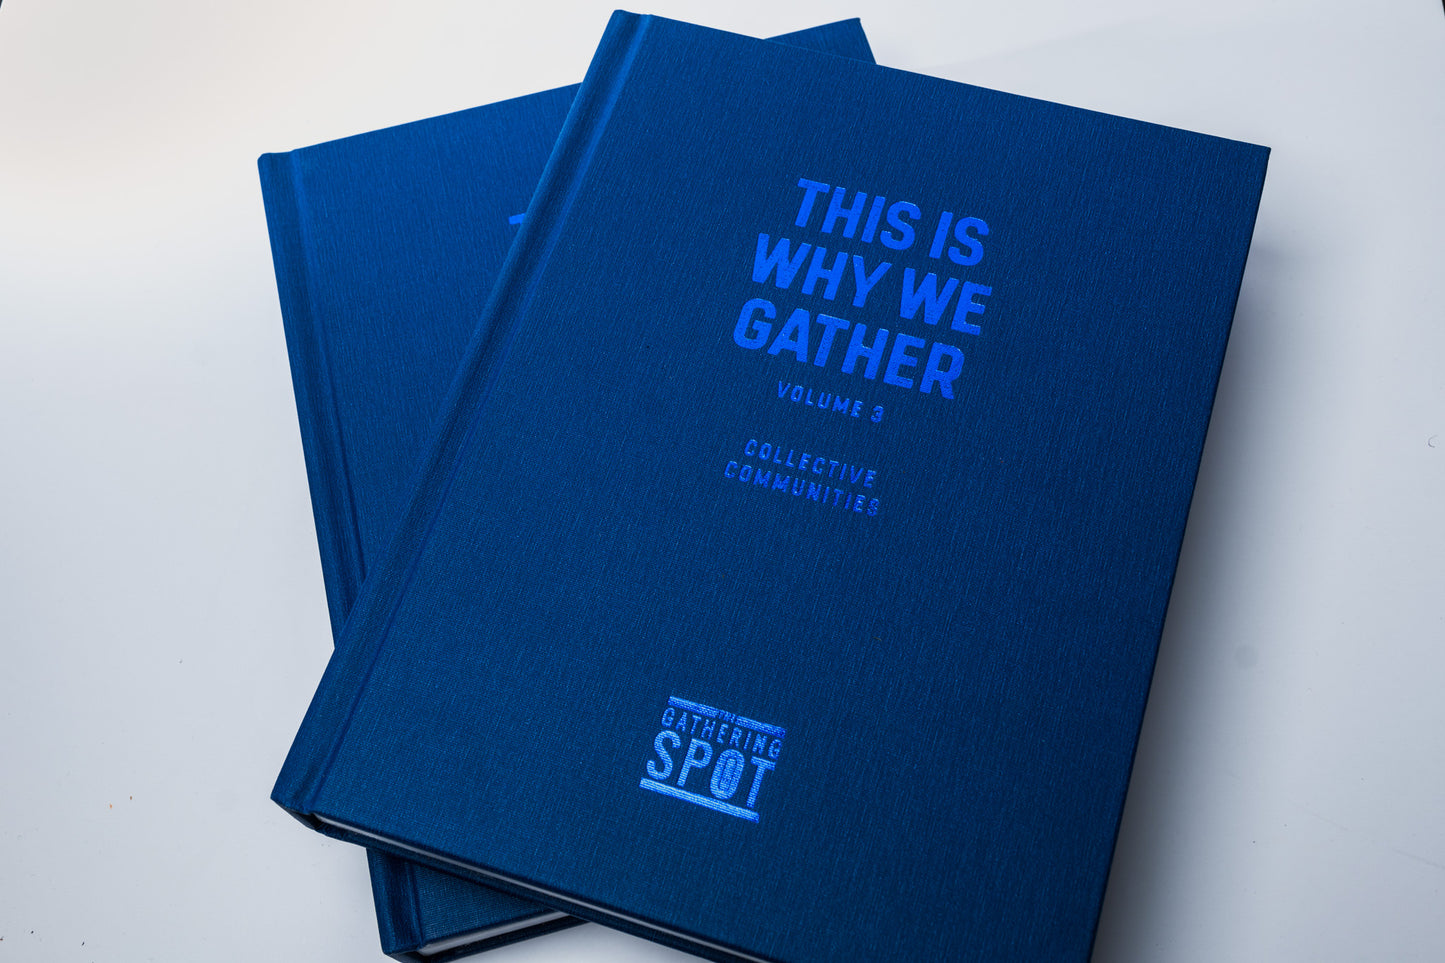 This Is Why We Gather Vol. 3